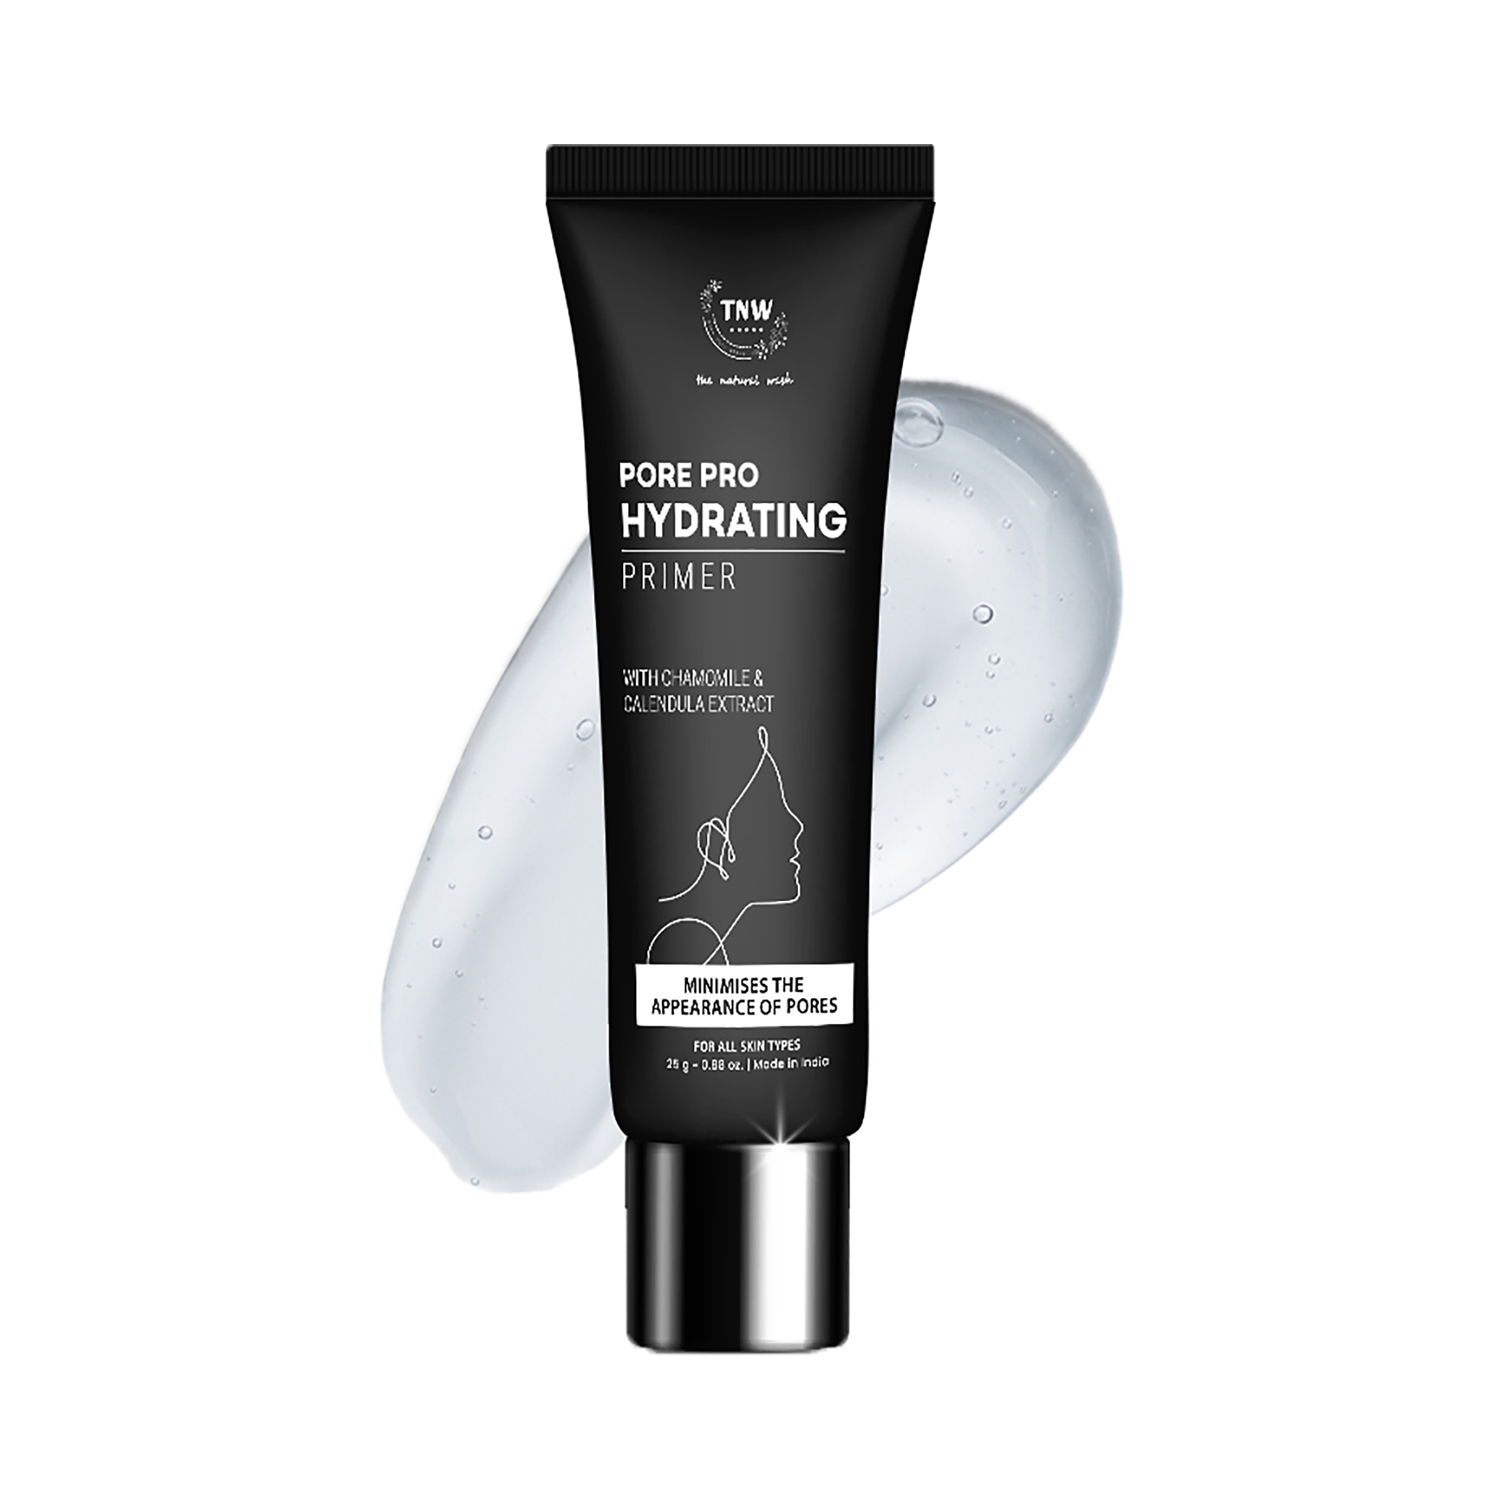 TNW The Natural Wash | TNW The Natural Wash Pore Pro Hydrating Primer with Chamomile and Calendula Extracts - Clear (25g)